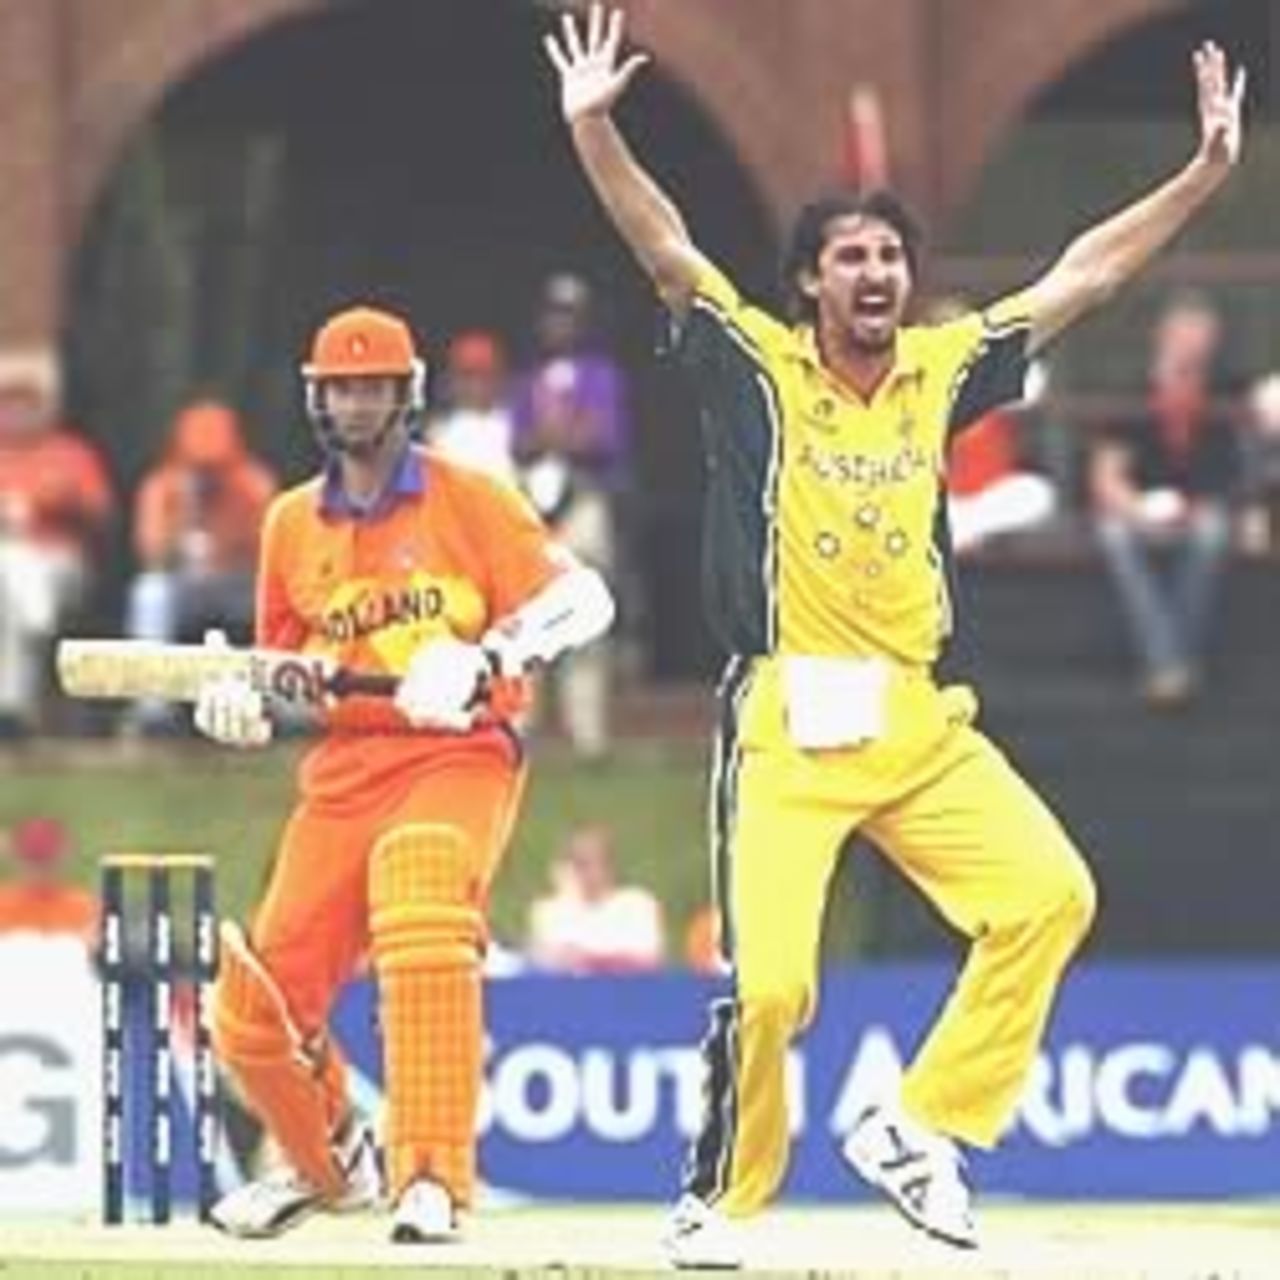 POTCHEFSTROOM - FEBRUARY 20: Jason Gillespie of Australia appeals for the wicket of Klaas Van Noortwijk of Holland during the World Cup One Day International between Australia and Holland at North West Cricket Stadium, Potchefstroom, South Africa, on February 20, 2003.